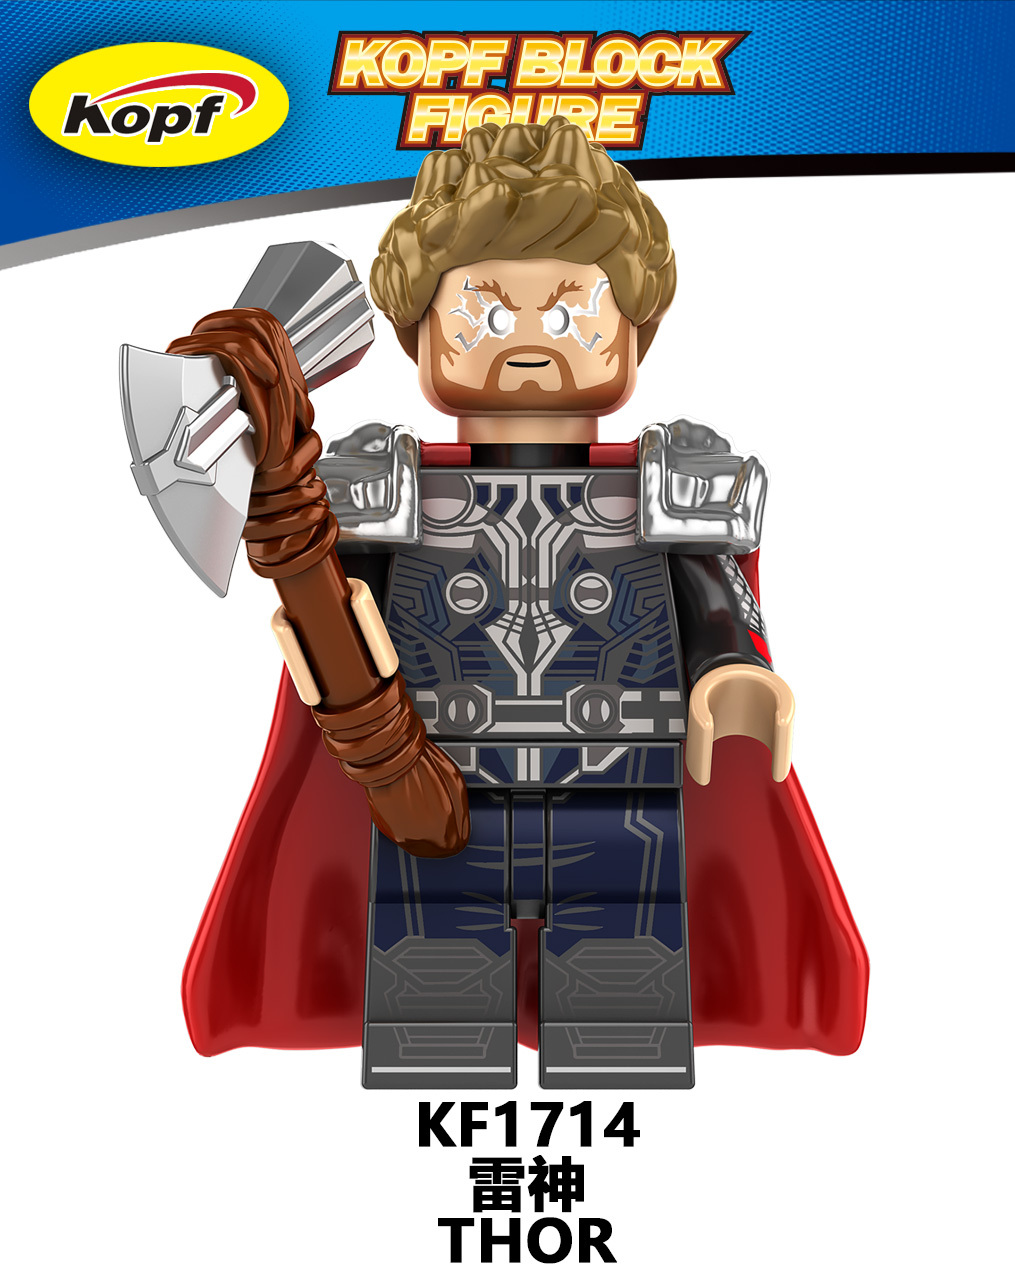 KF6161 KF1709 KF1710 KF1711 KF1712 KF1713 KF1714 KF1715 KF1716 Super Hero Thor Movie Series Building Blocks Action Figures Educational Toys For Kids Gifts